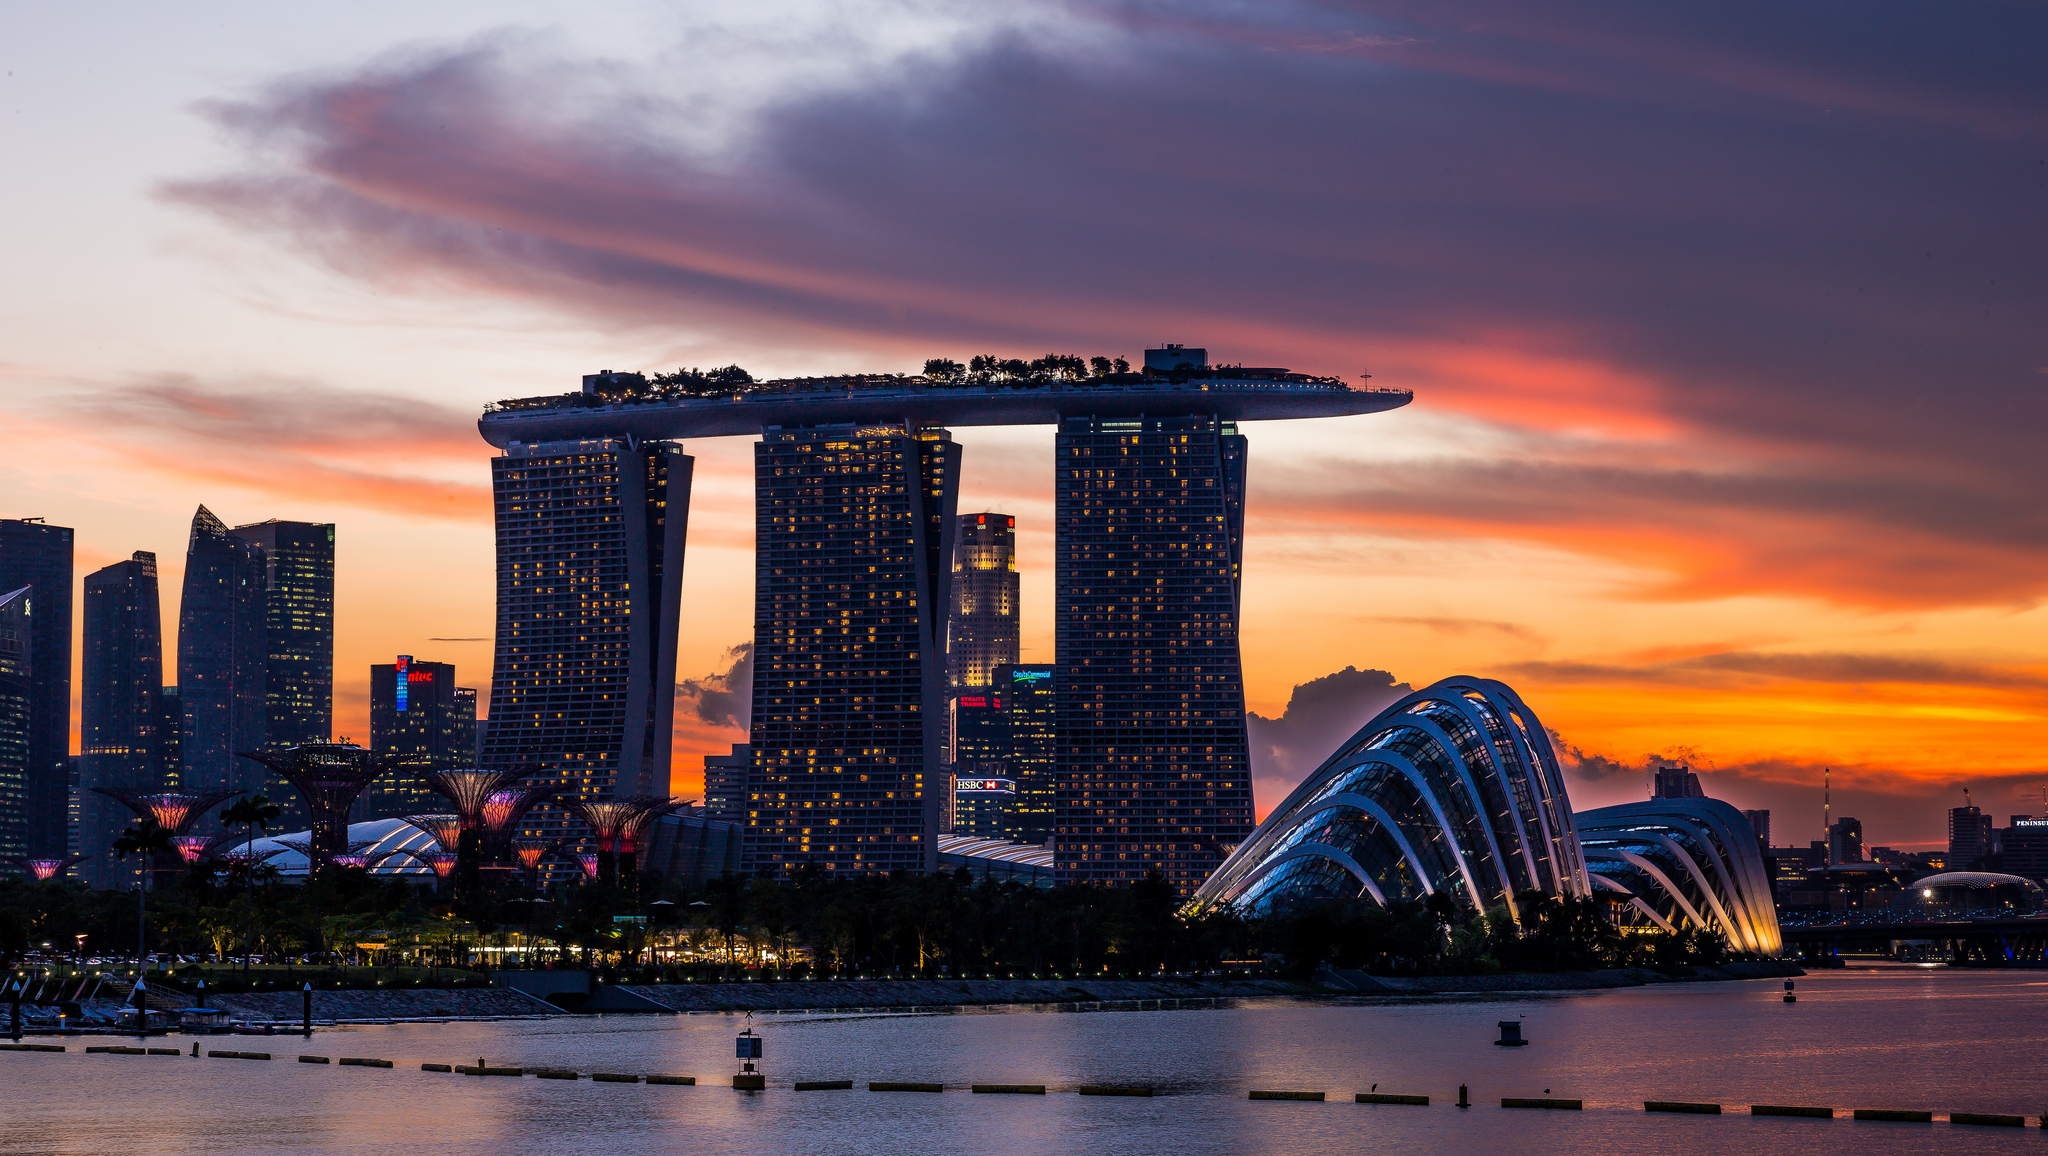 The Top Ten Architectural Highlights Of Singapore